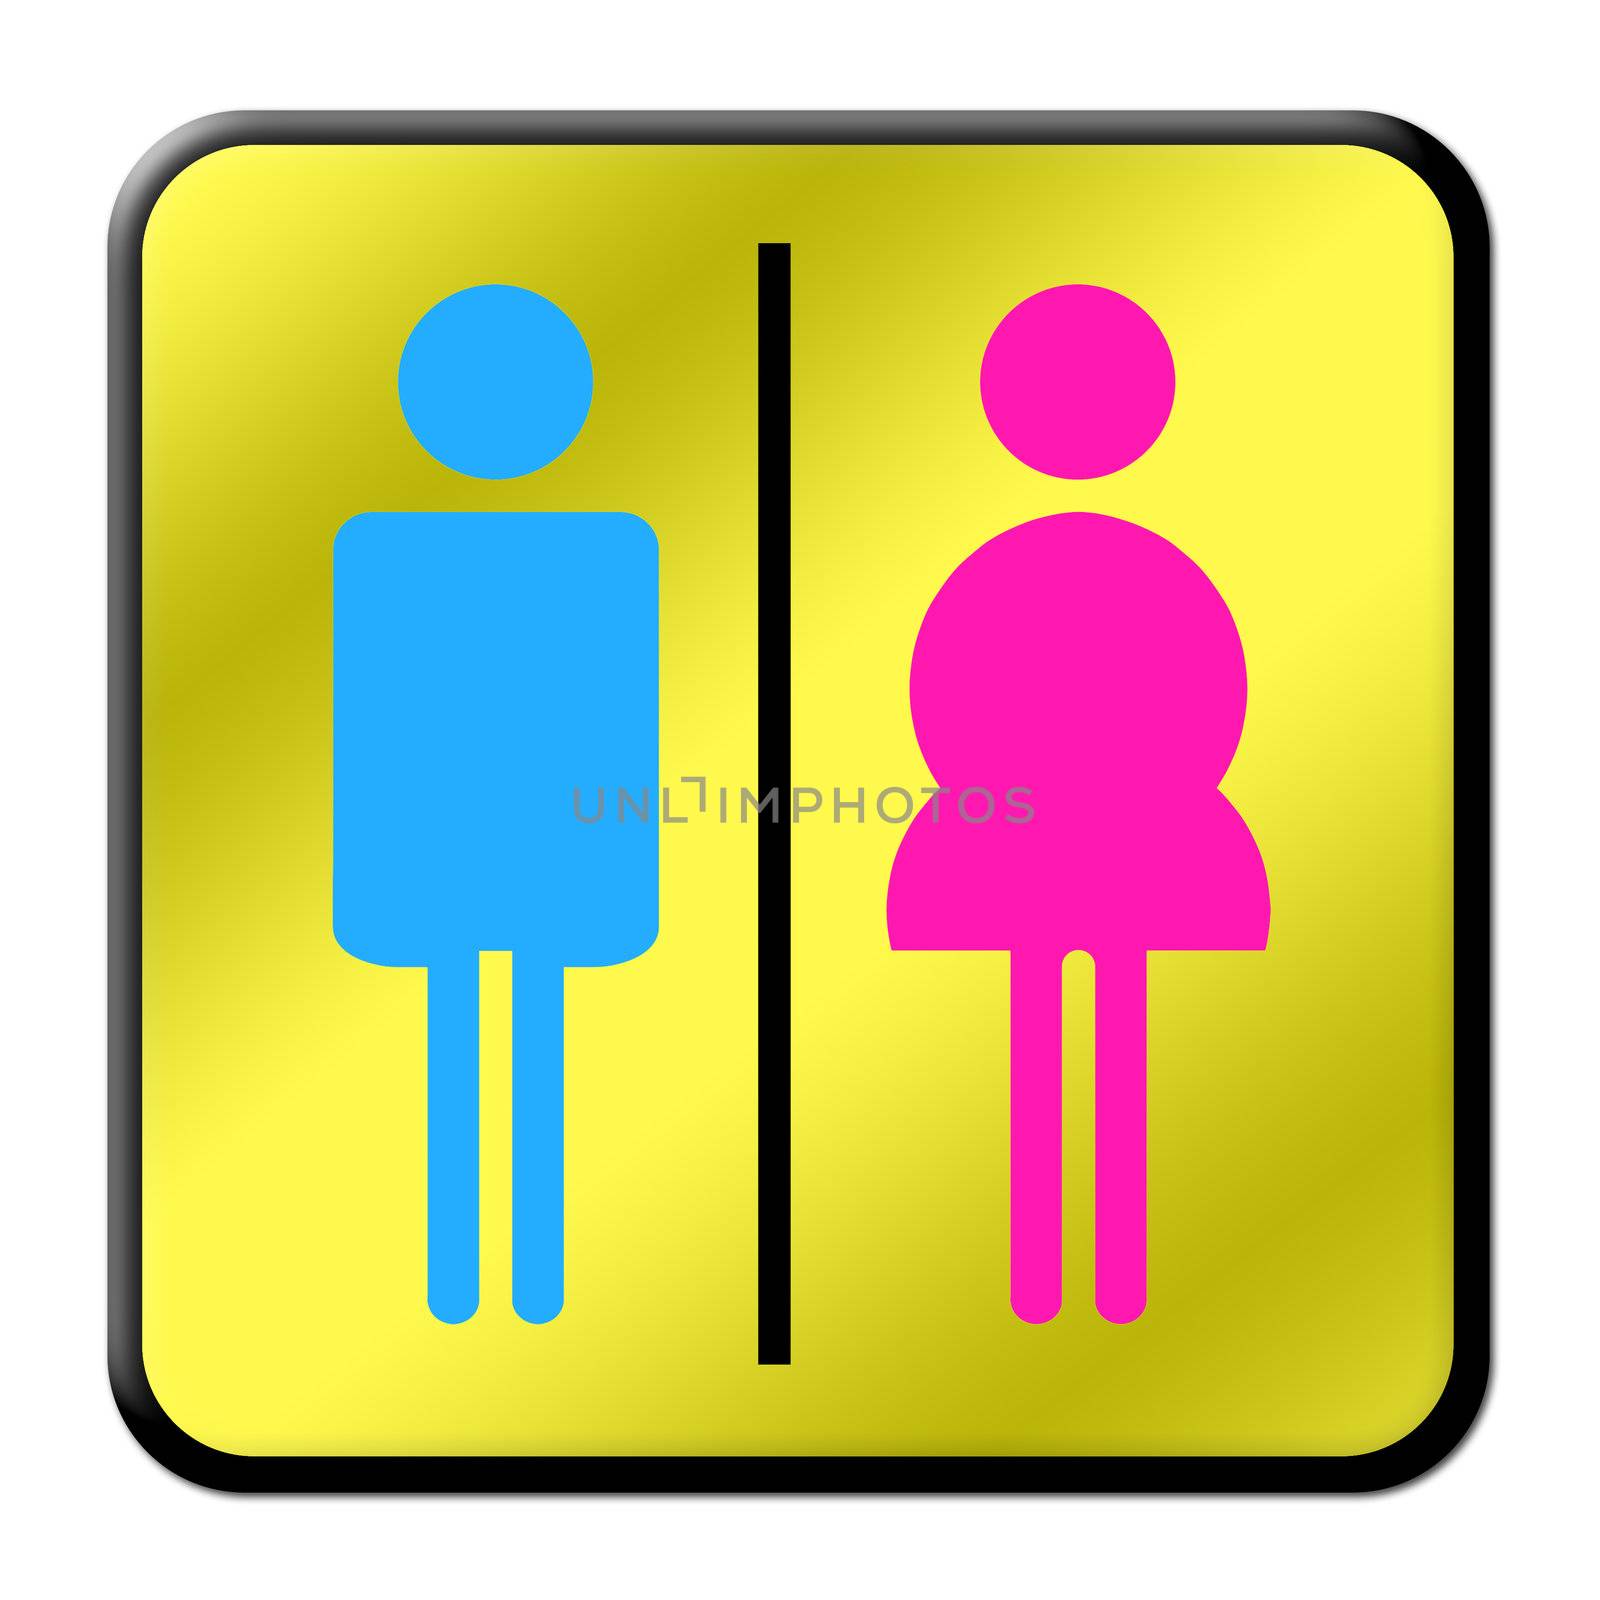 Colored Man & Woman restroom sign by geargodz